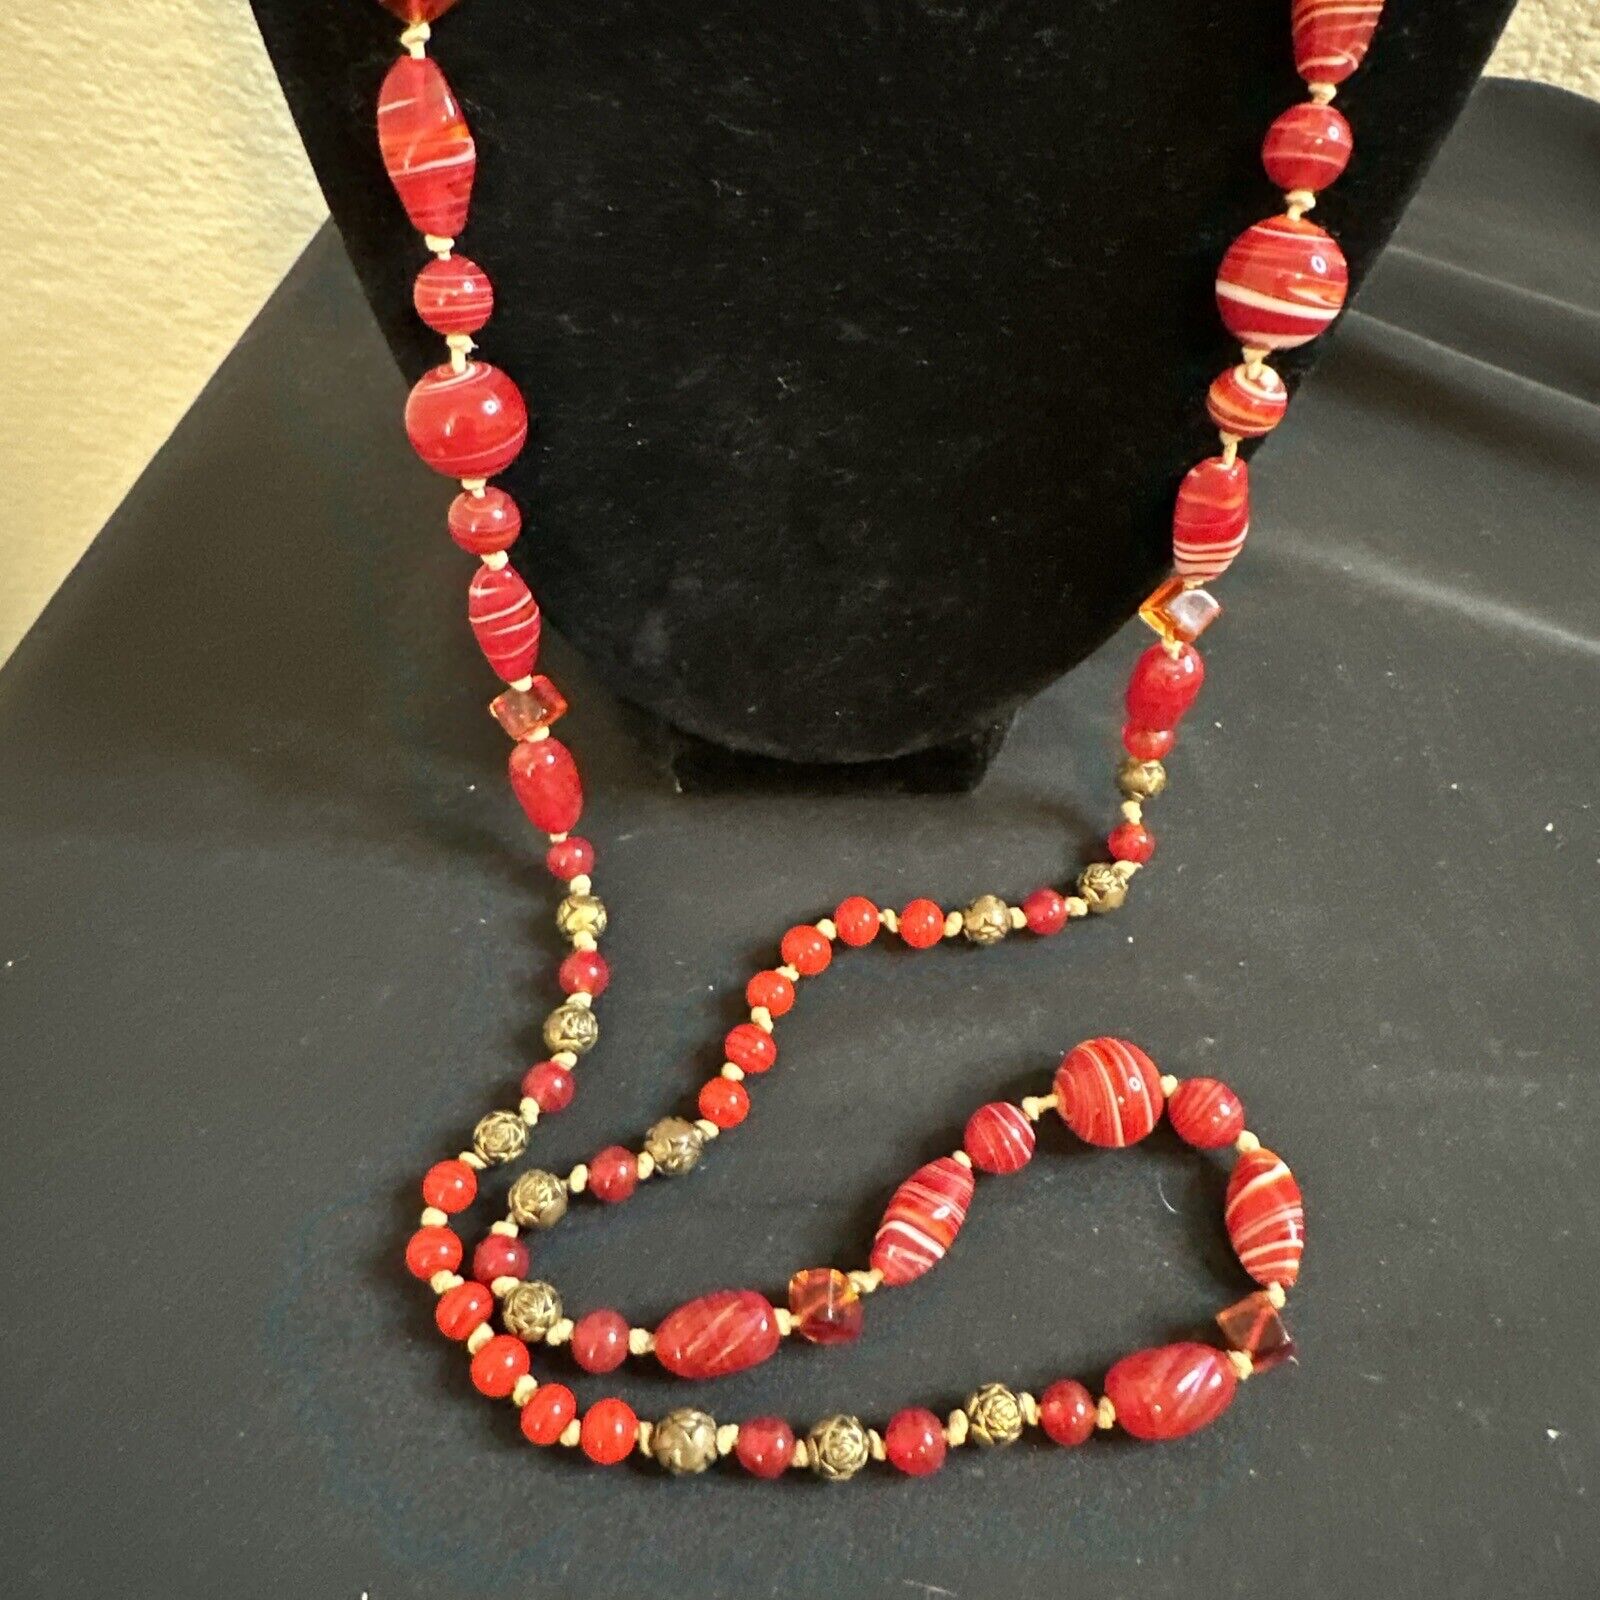 Lampworked Glass Necklace Red White Swirls 40-50’… - image 1